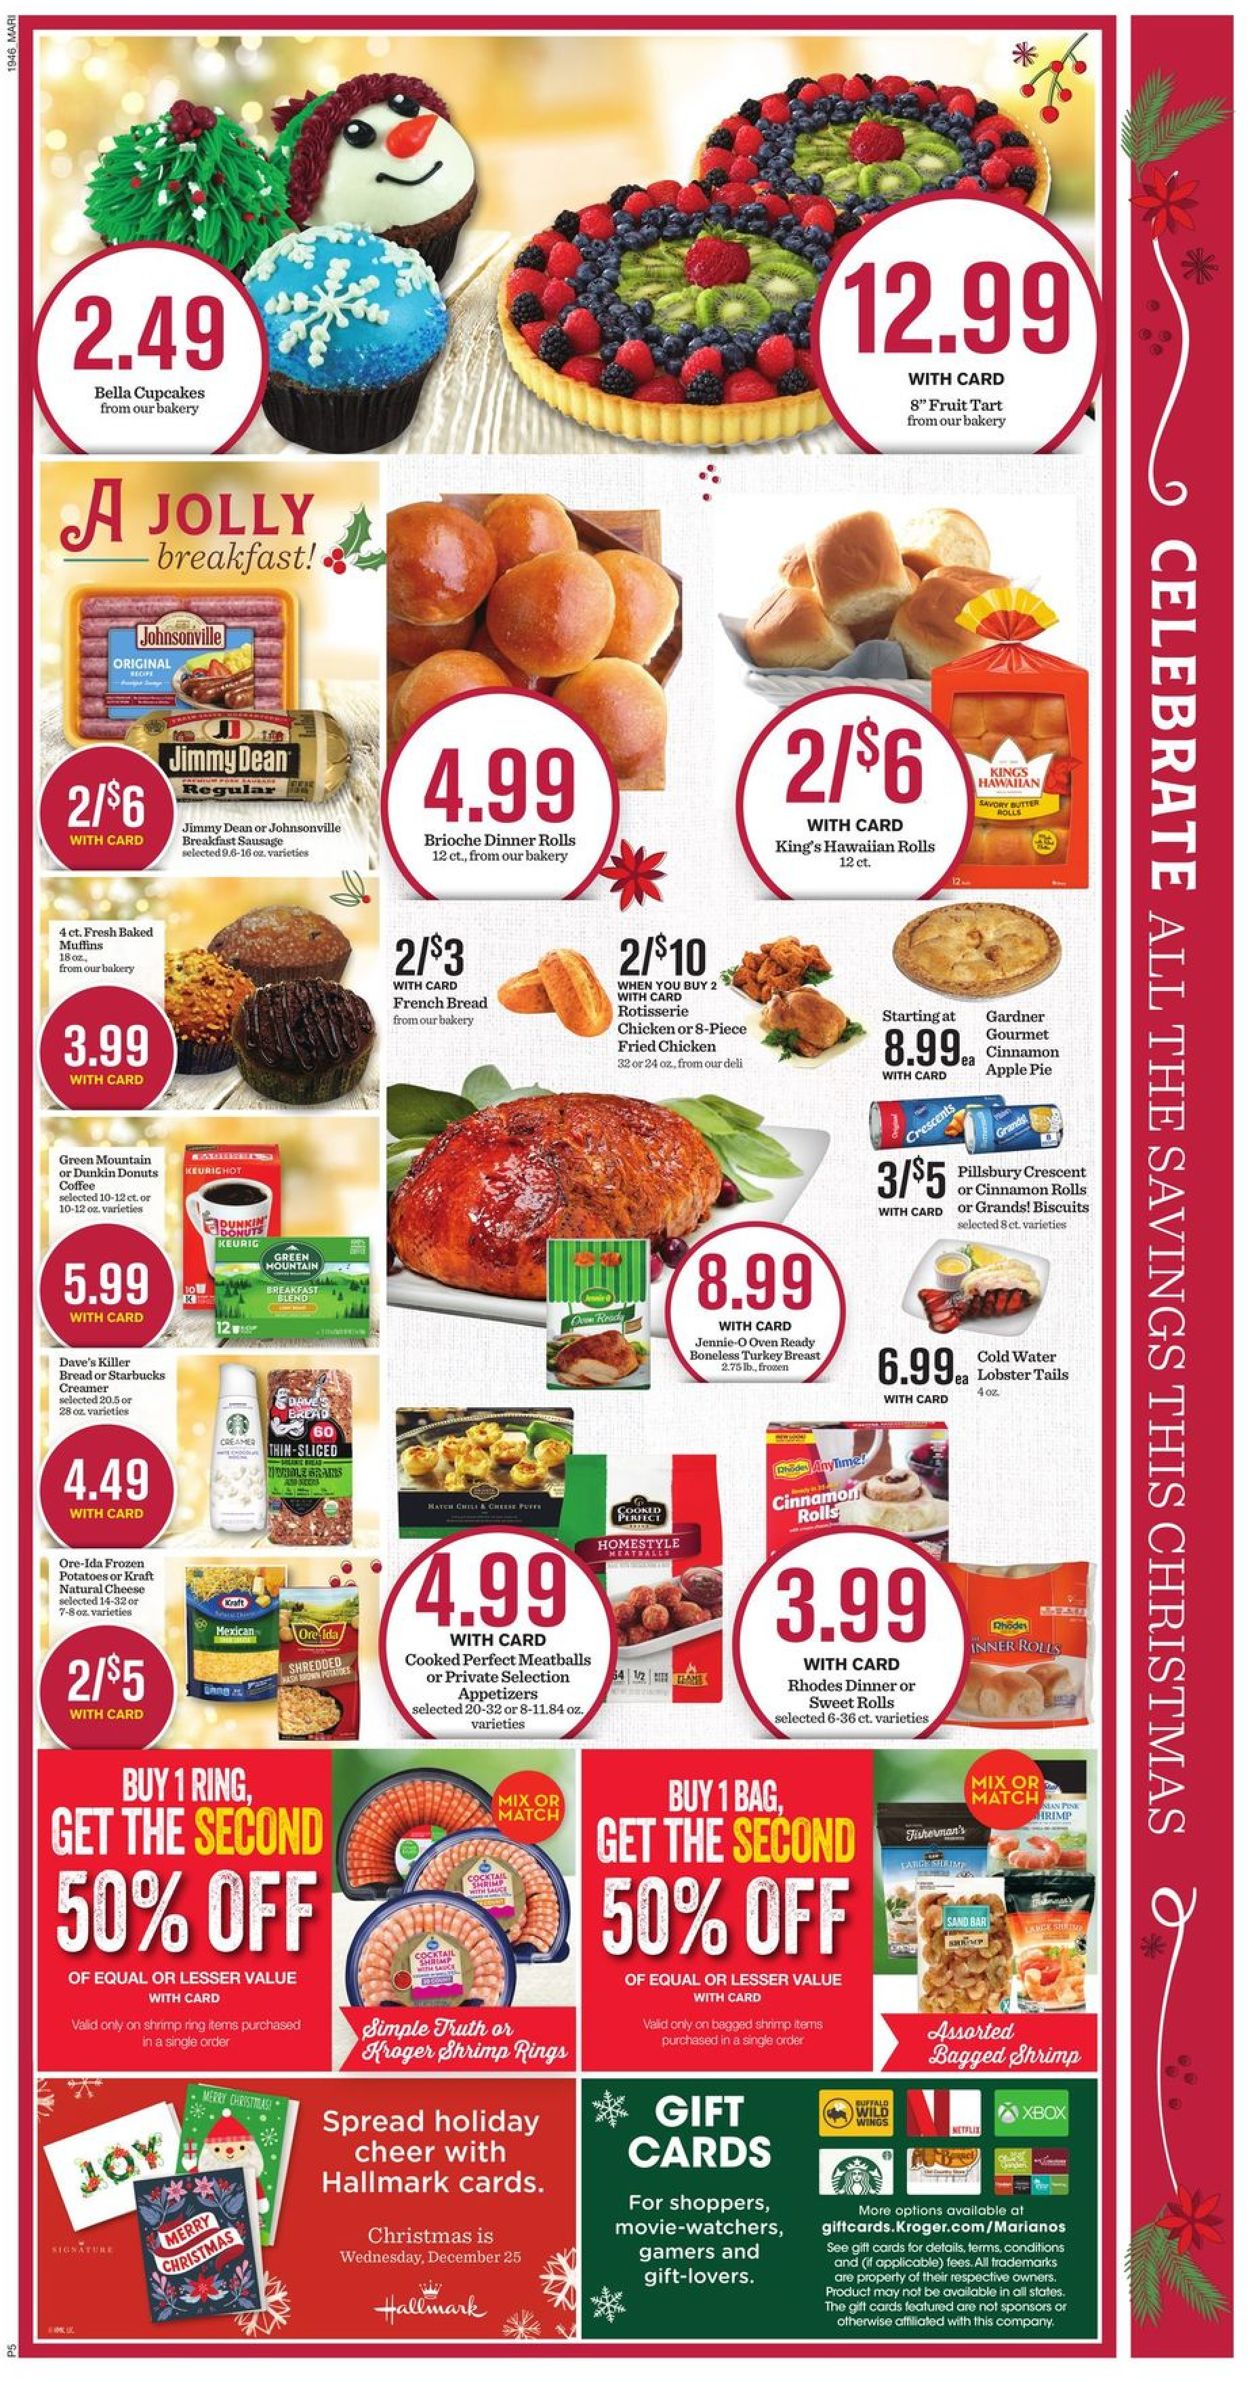 Mariano's Current weekly ad 12/18 - 12/24/2019 3 - frequent-ads.com